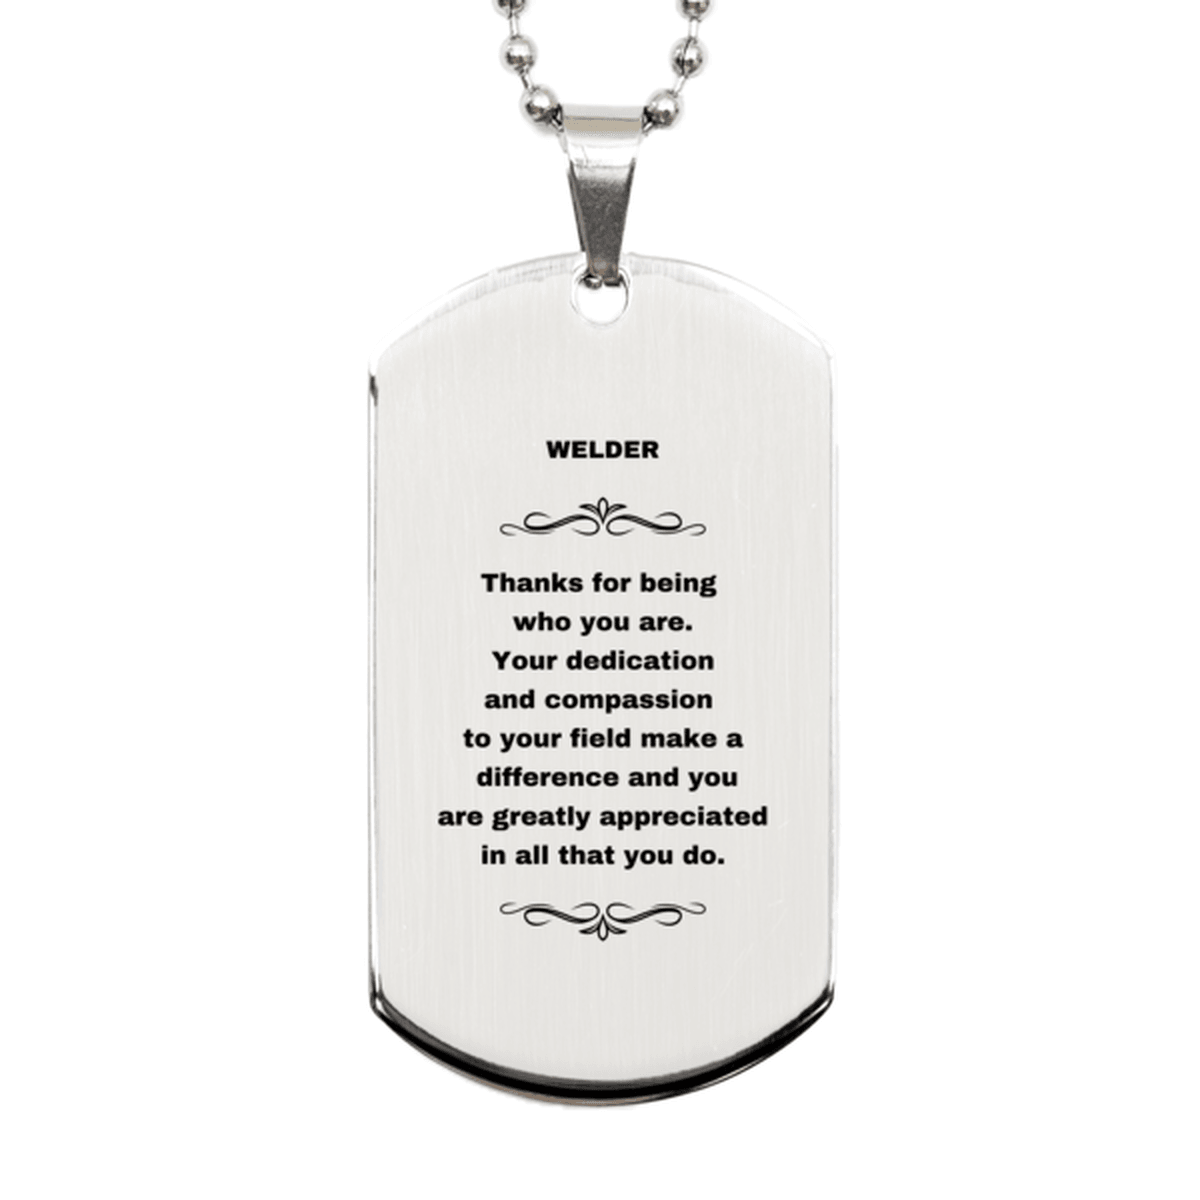 Welder Silver Engraved Dog Tag Necklace - Thanks for being who you are - Birthday Christmas Jewelry Gifts Coworkers Colleague Boss - Mallard Moon Gift Shop